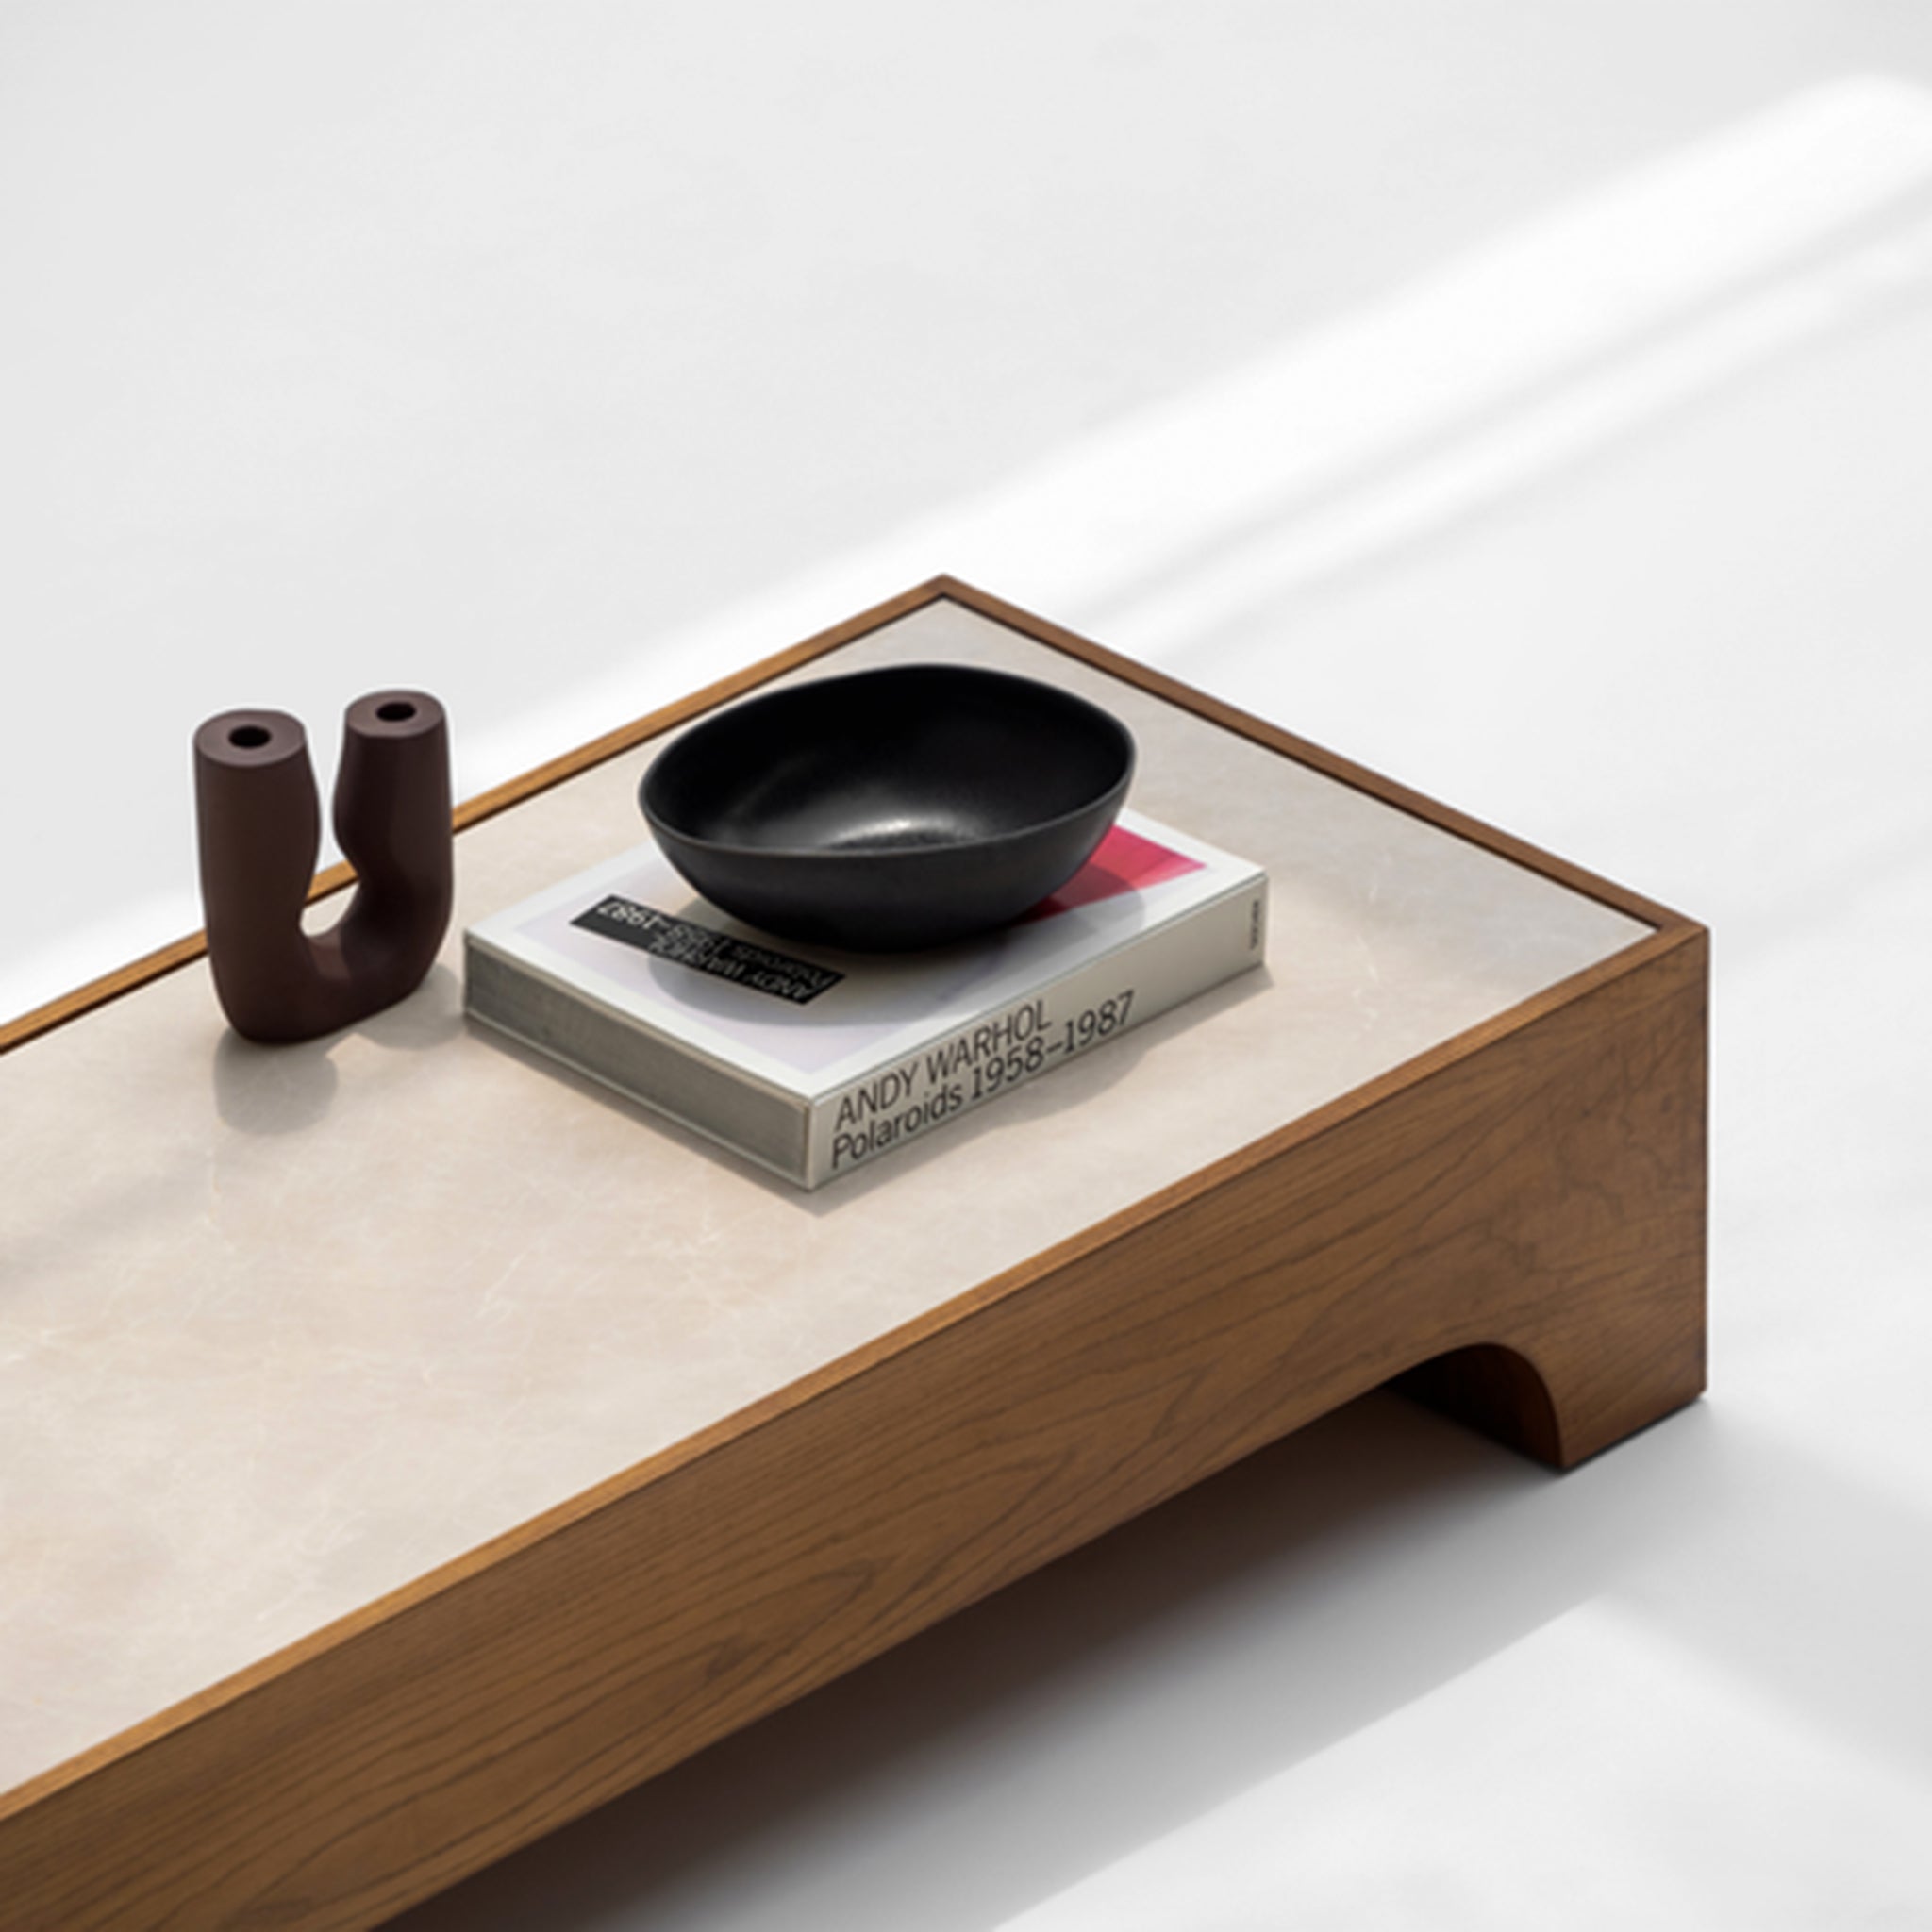 Modern Low Coffee Table: The Noah Table features a sleek ashwood and marble design.